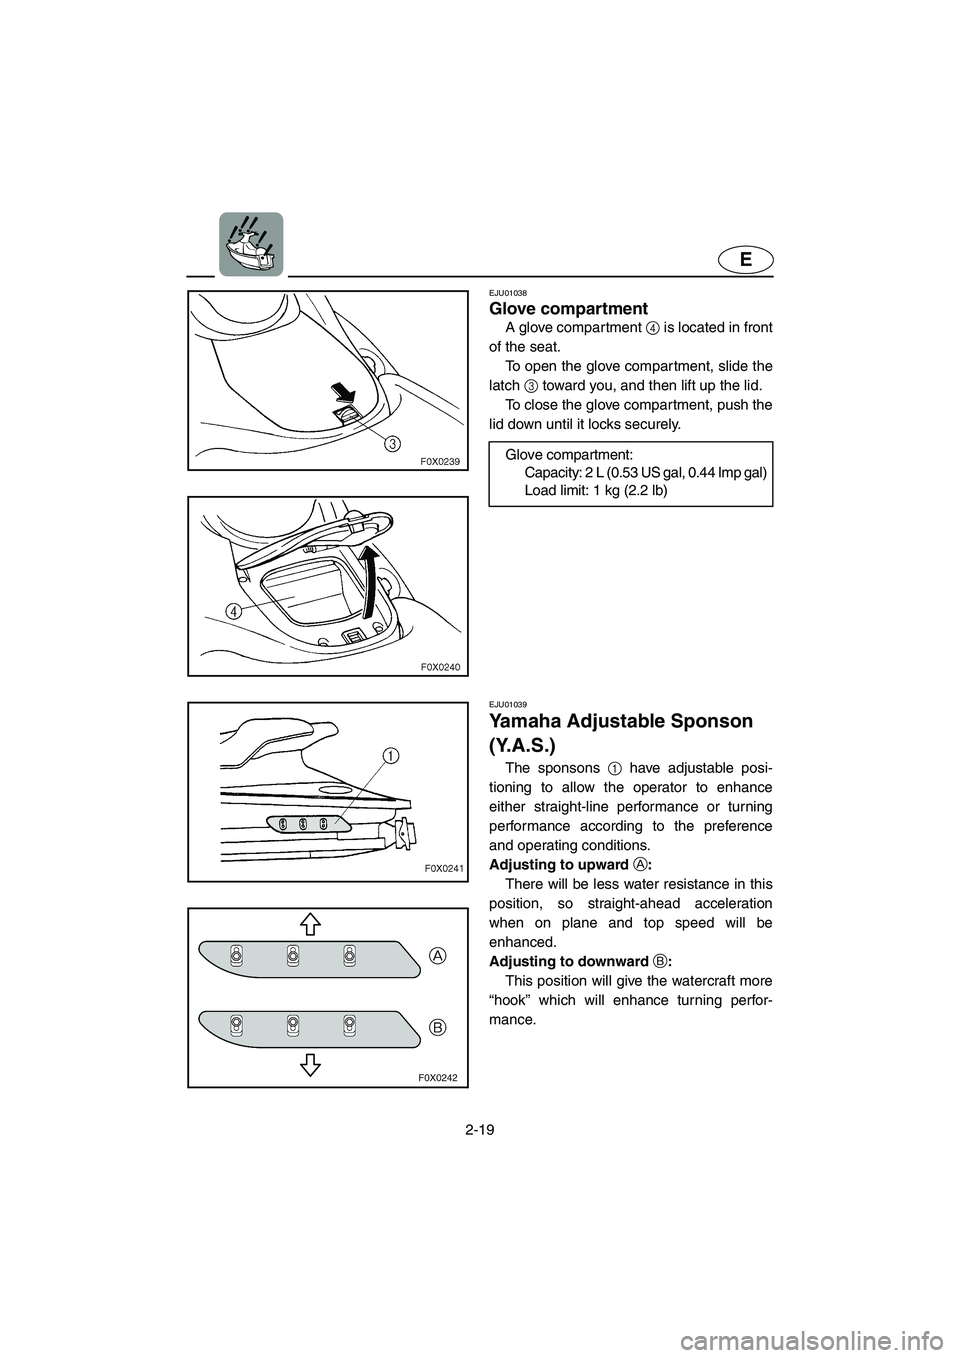 YAMAHA GP800R 2002  Owners Manual 2-19
E
EJU01038 
Glove compartment  
A glove compartment 4 is located in front
of the seat. 
To open the glove compartment, slide the
latch 3 toward you, and then lift up the lid. 
To close the glove 